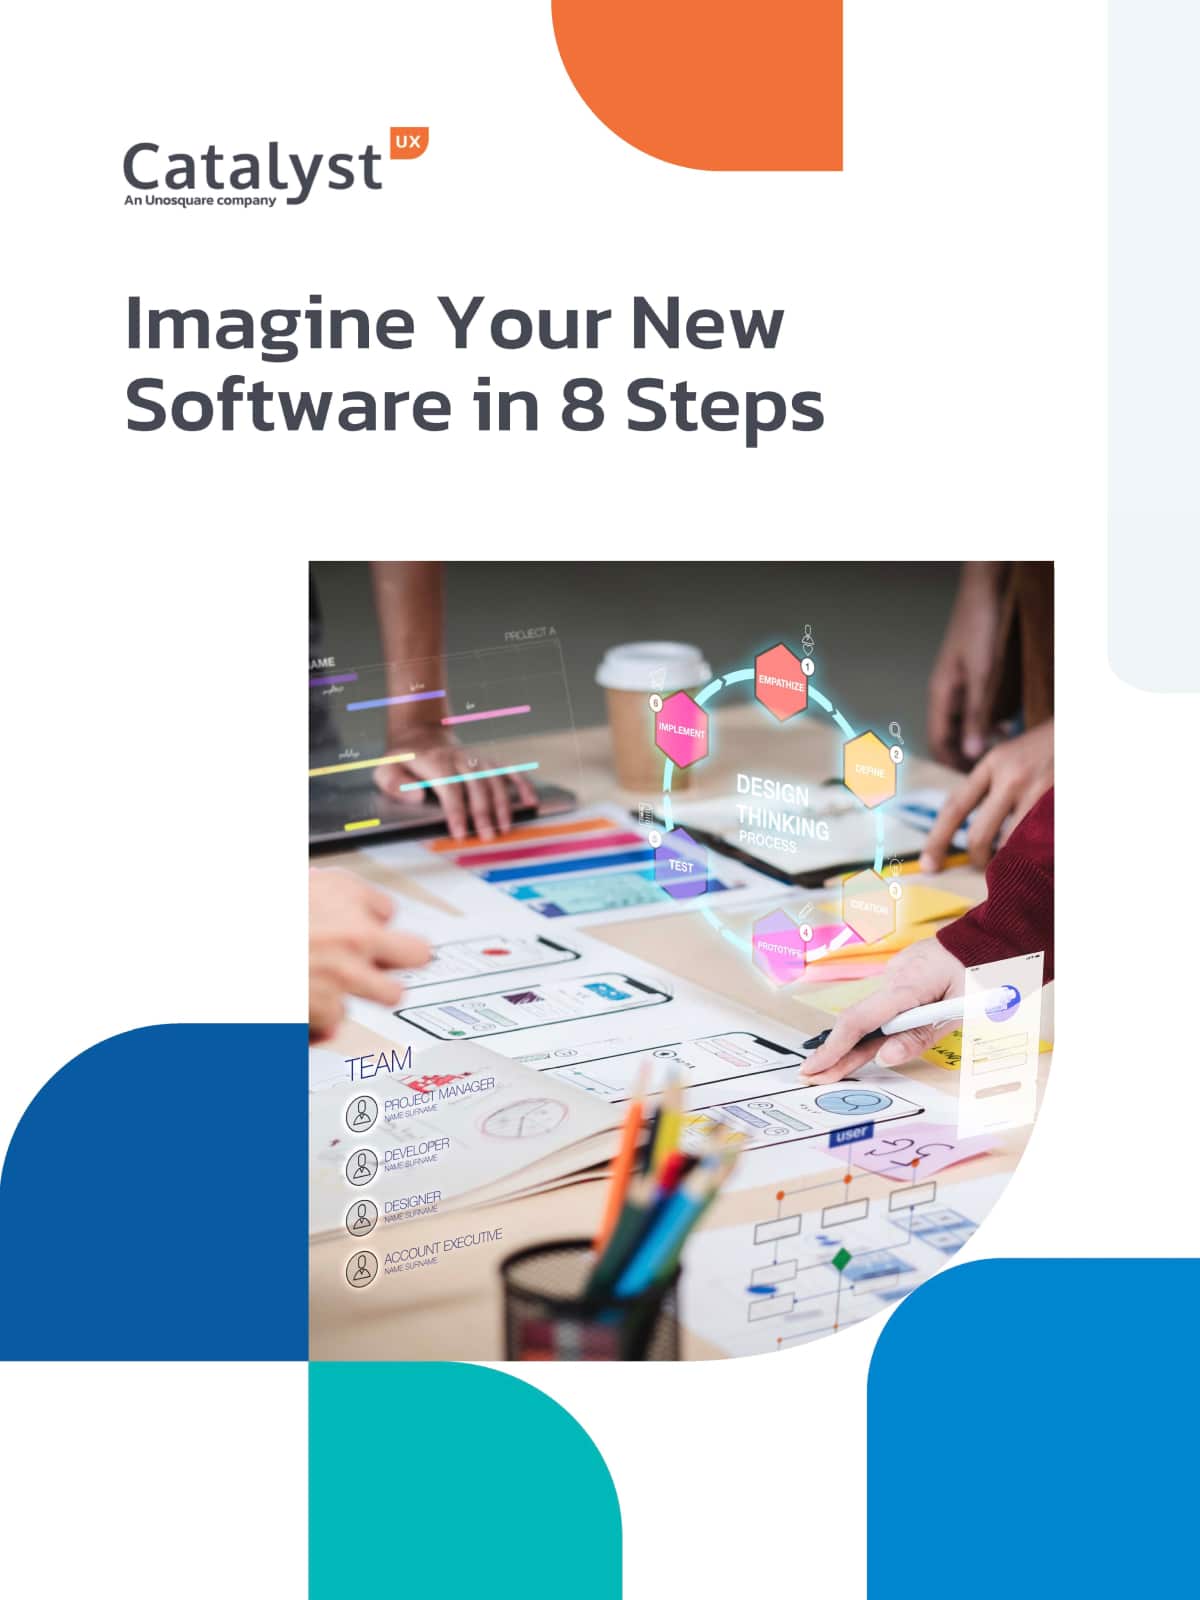 Imagine Your New Software Page 1